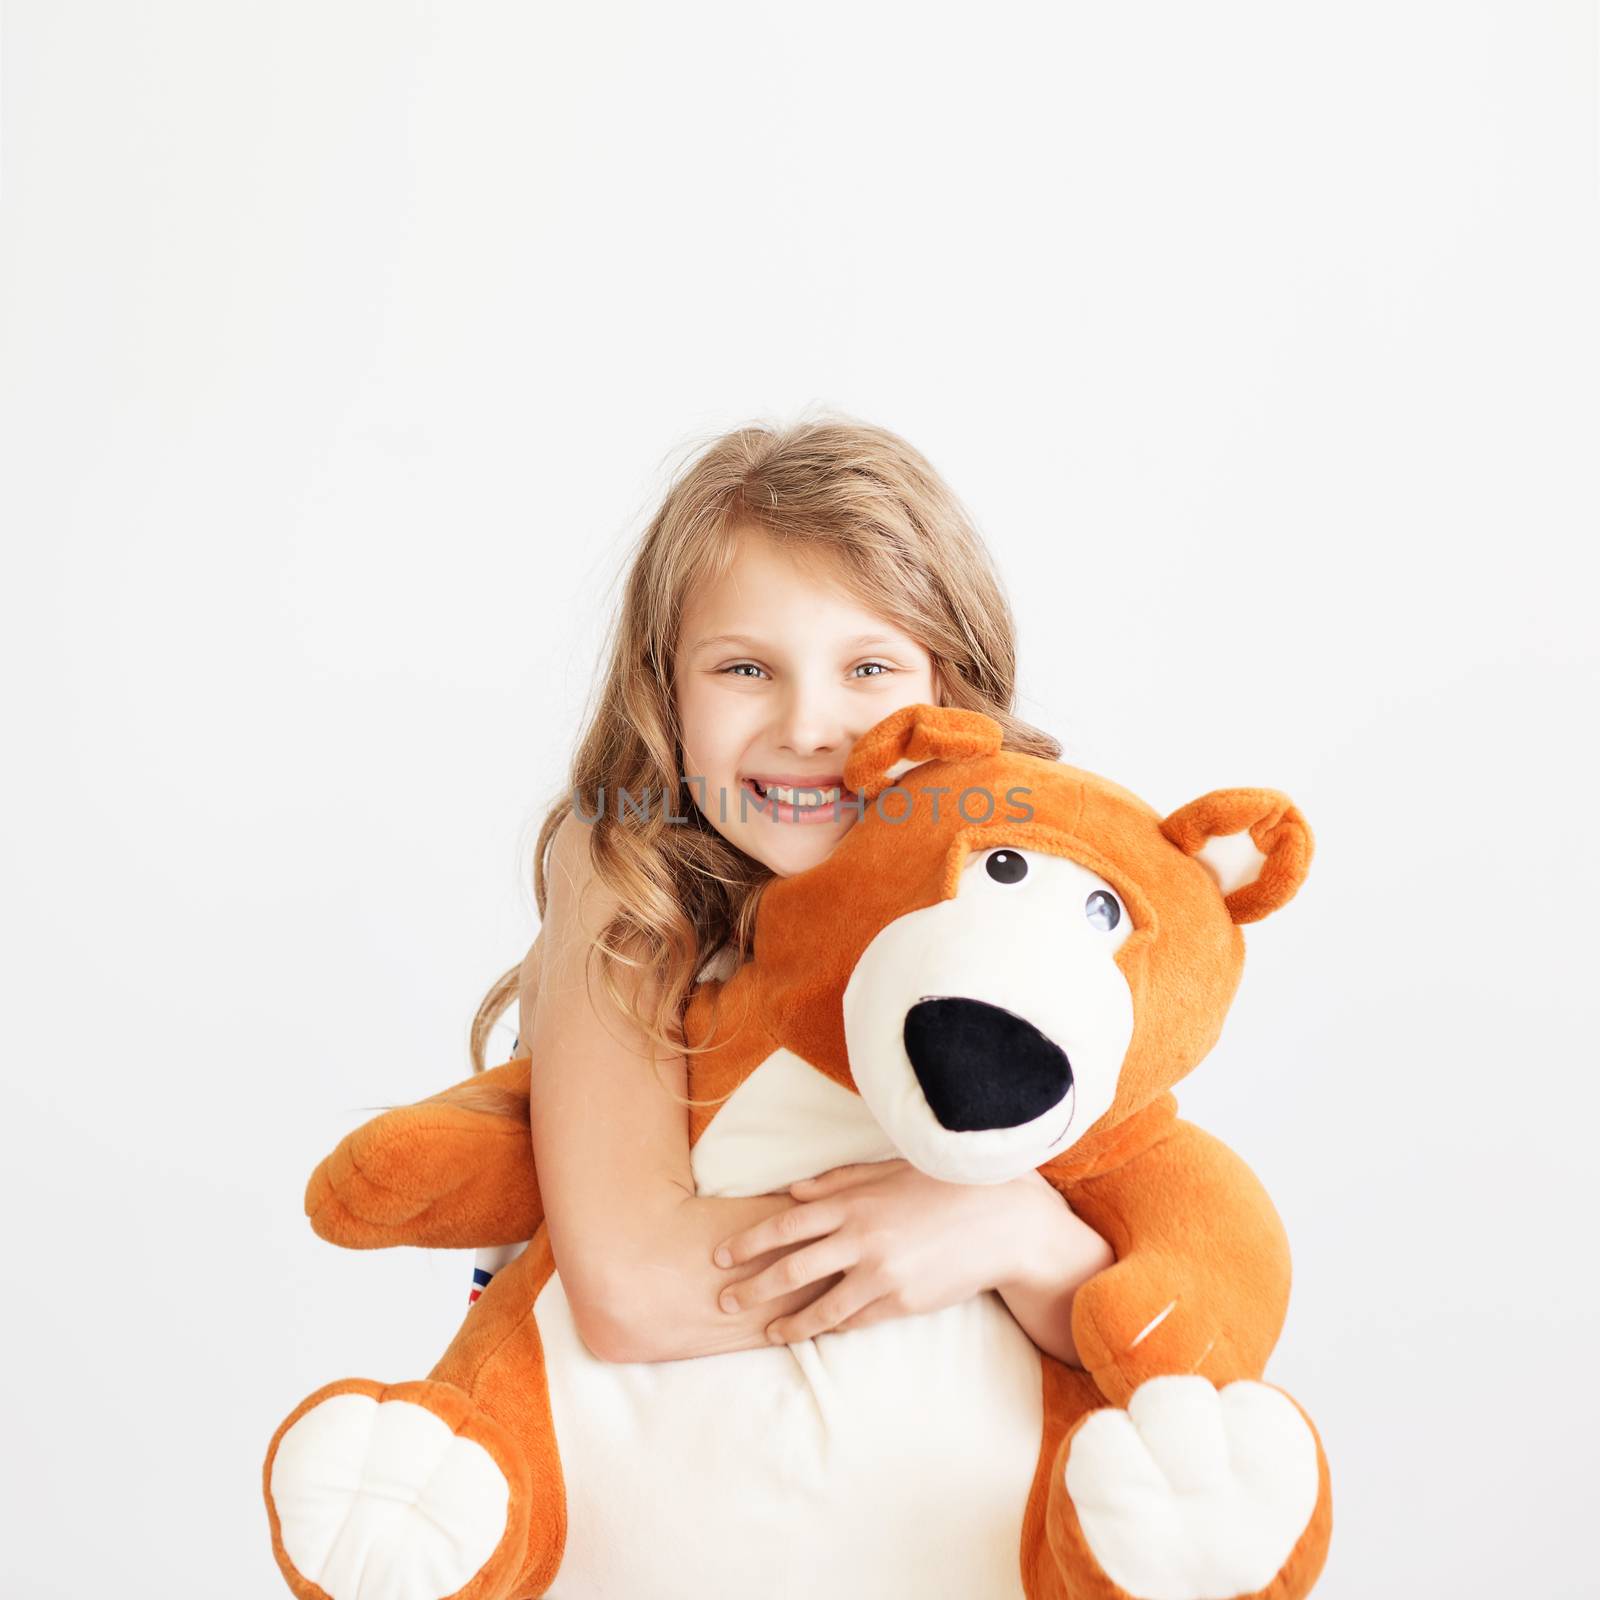 Little girl with big teddy bear having fun laughing Isolated on white background